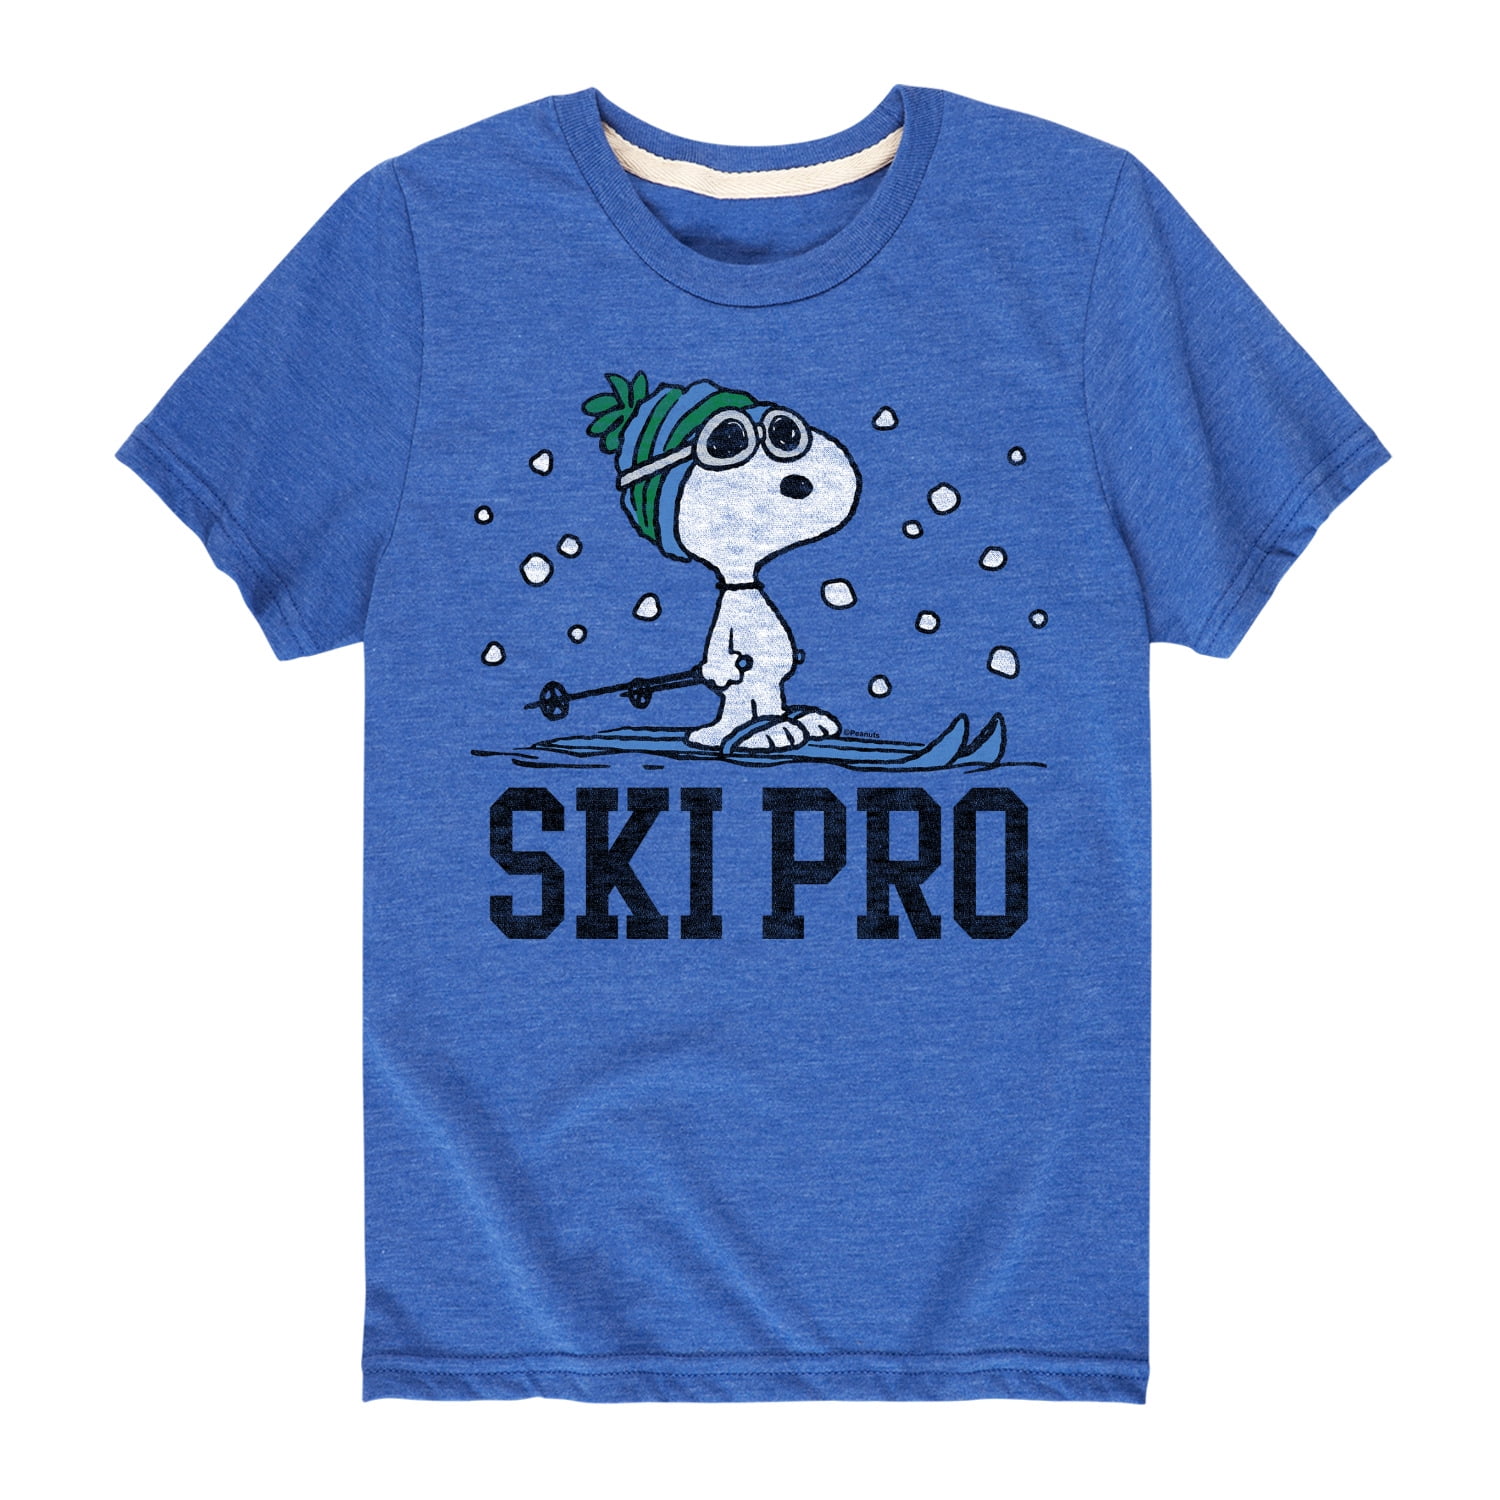 Peanuts - Snoopy Ski Pro - Toddler And Youth Short Sleeve Graphic T-Shirt 